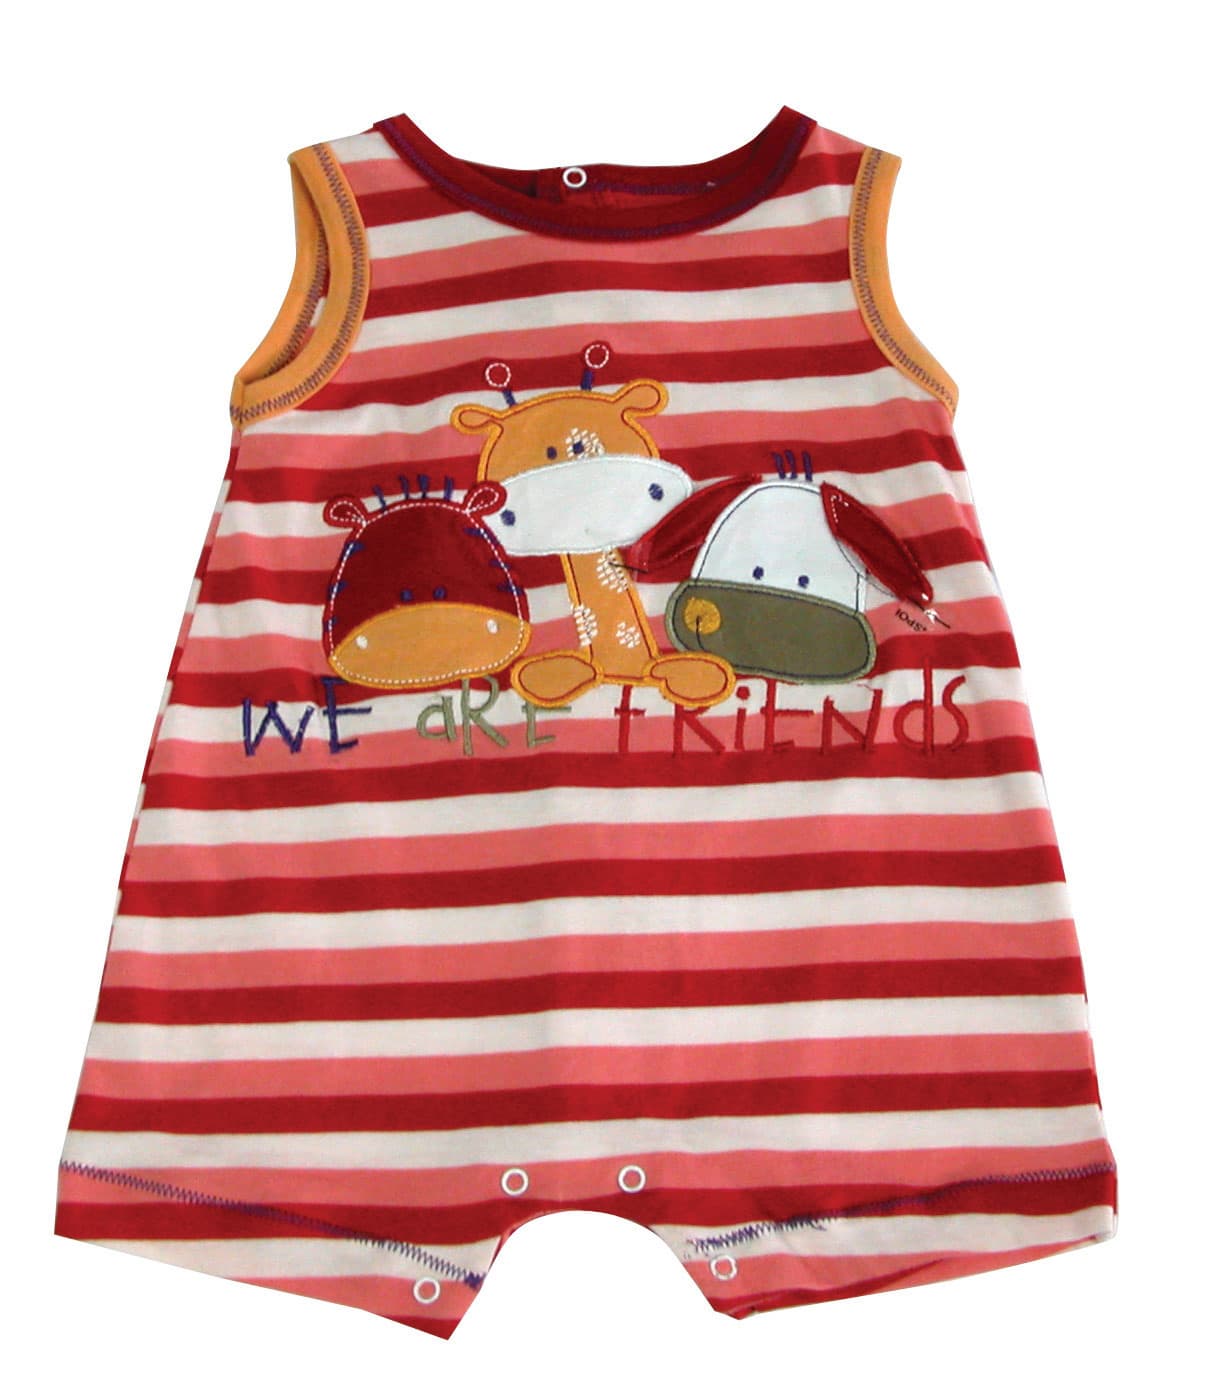 Kids wear and Baby Rompers